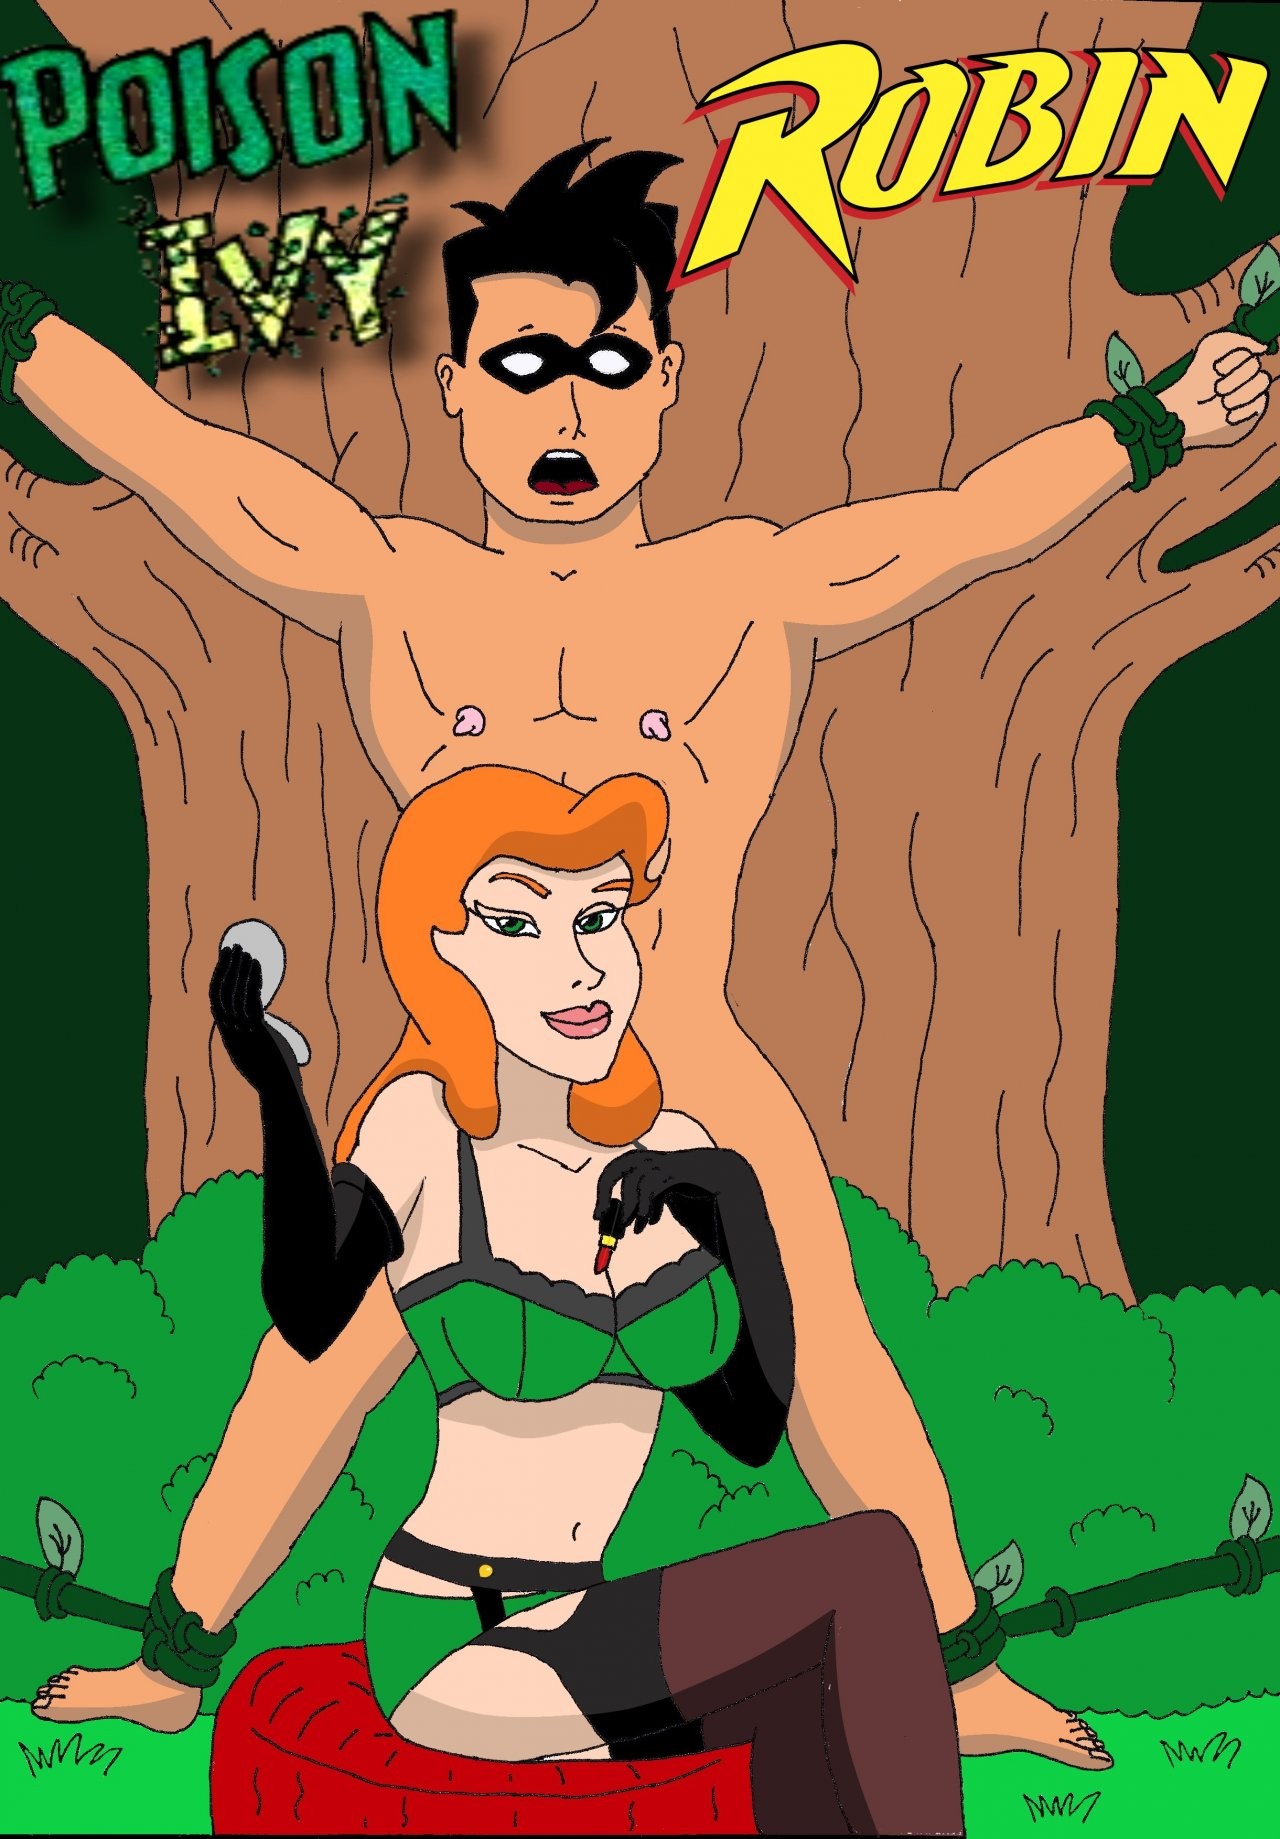 Poison Ivy & Robin: Elicitation of his Intimate Seed